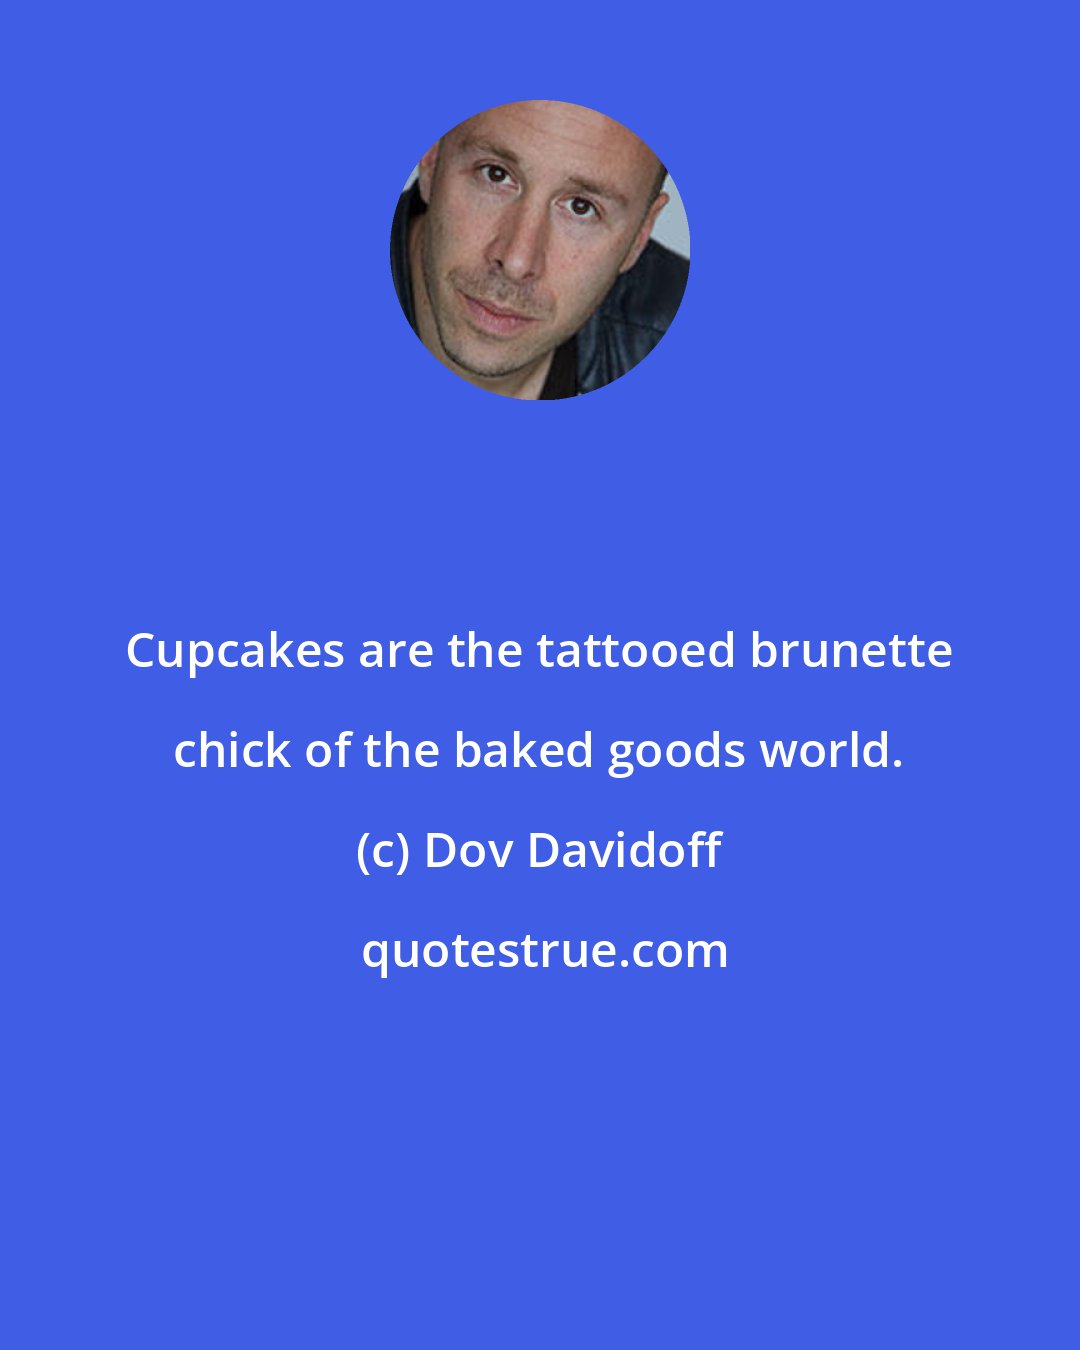 Dov Davidoff: Cupcakes are the tattooed brunette chick of the baked goods world.